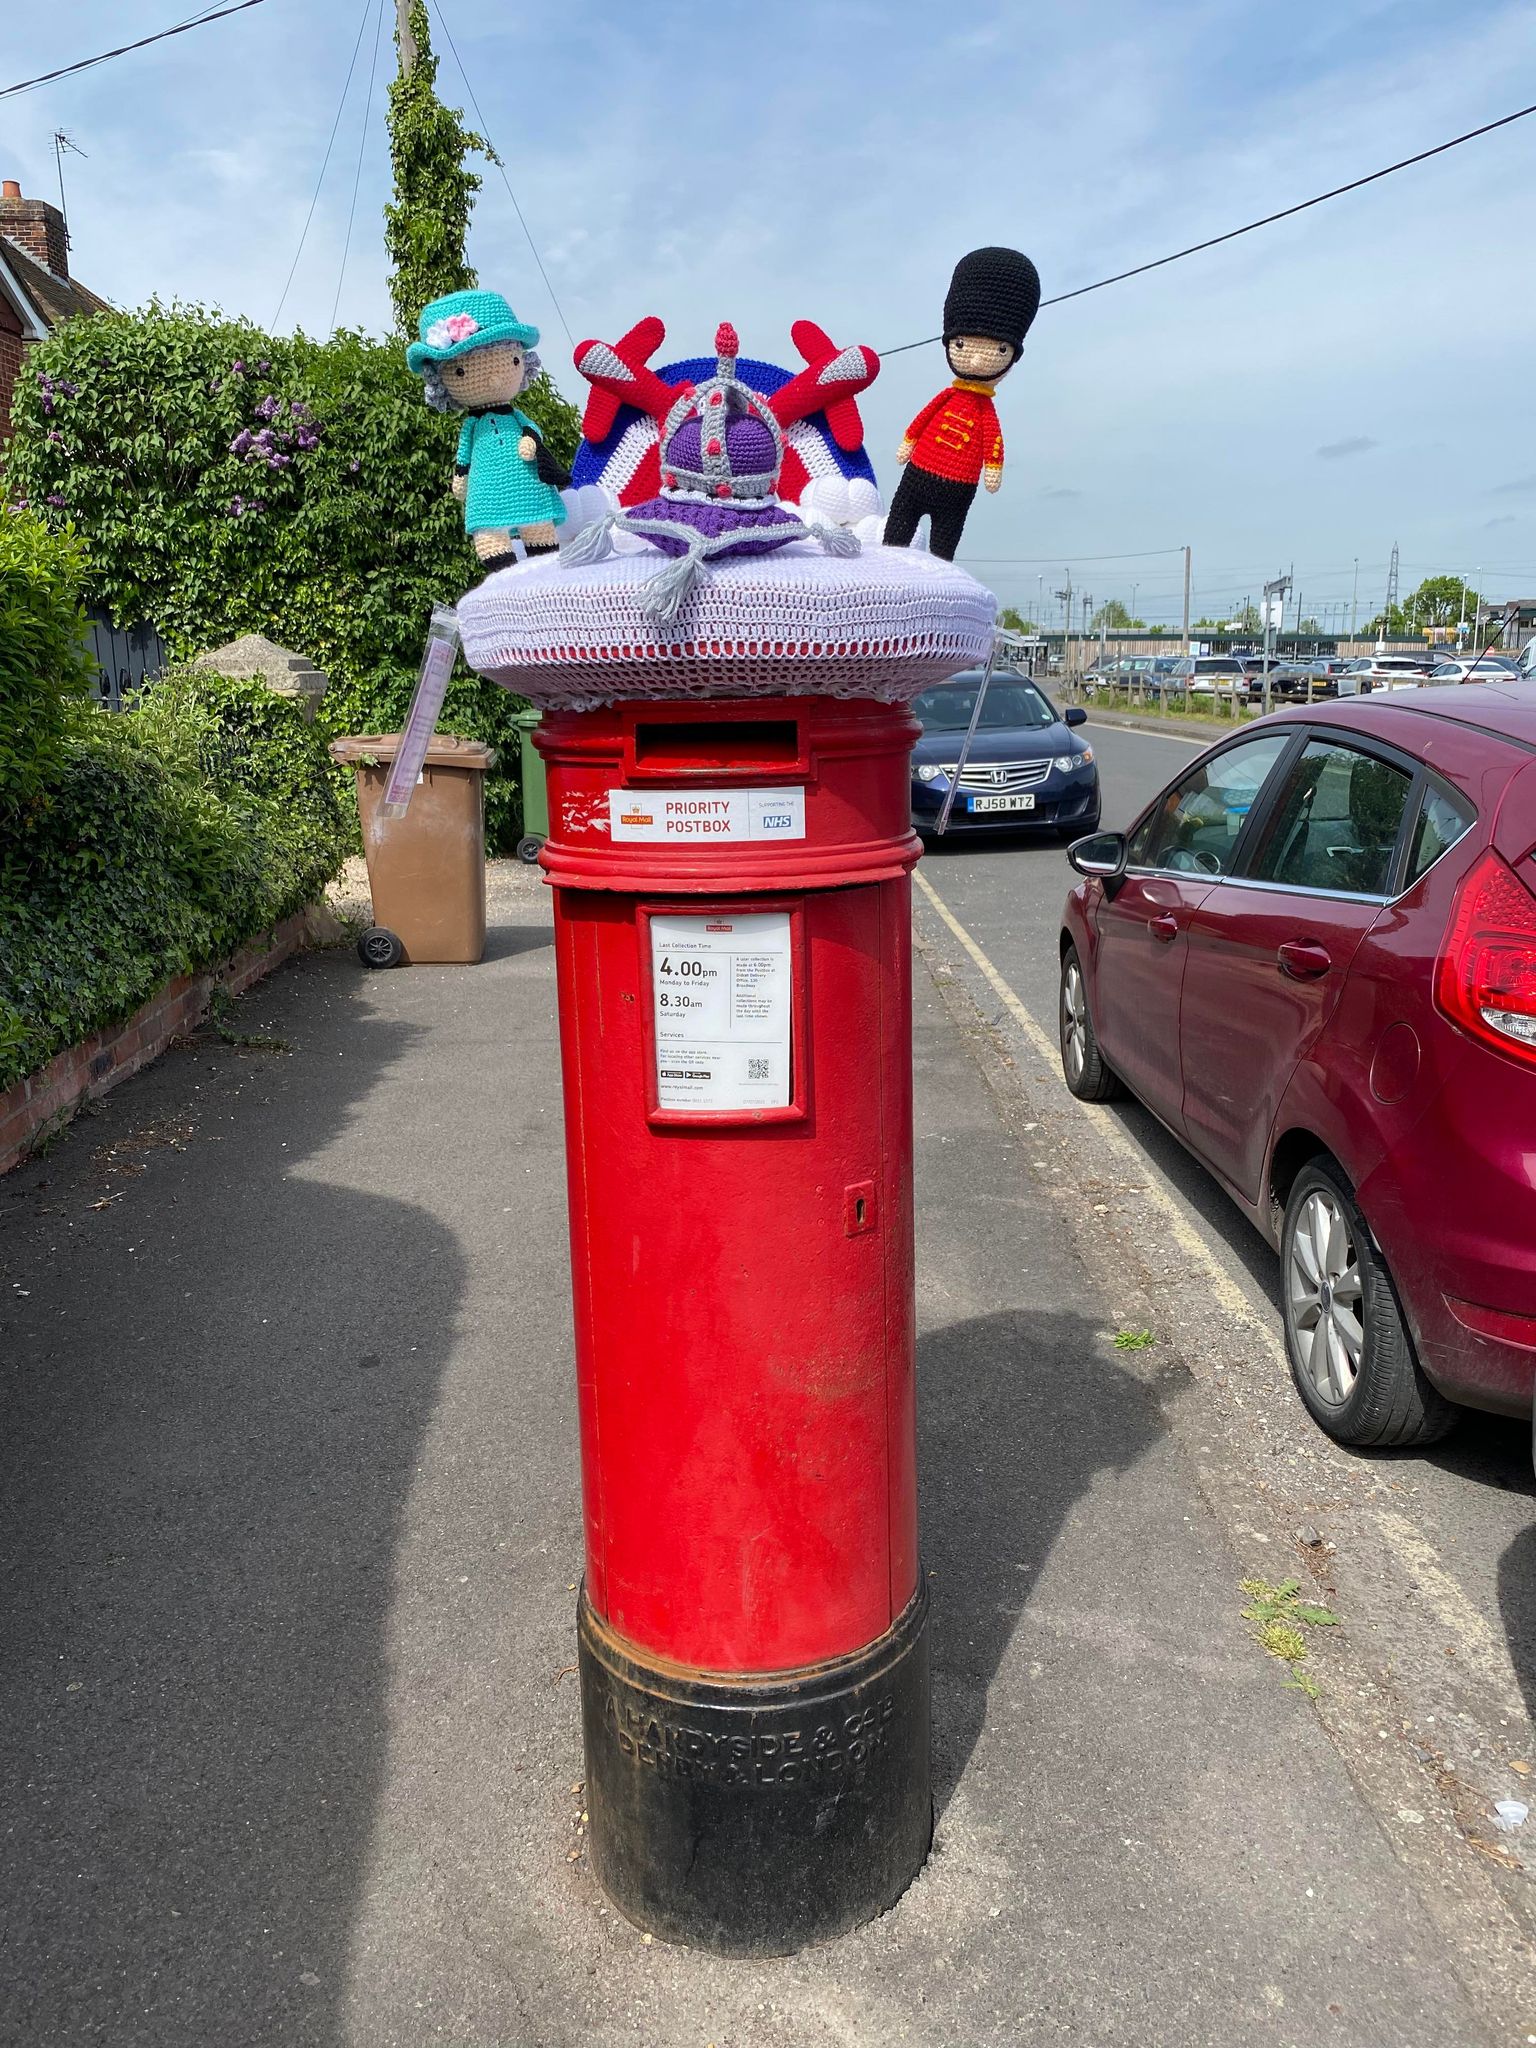 One crochet expert has decorated a nearby post box in Didcot, Oxfordshire (Yarnsy/PA)